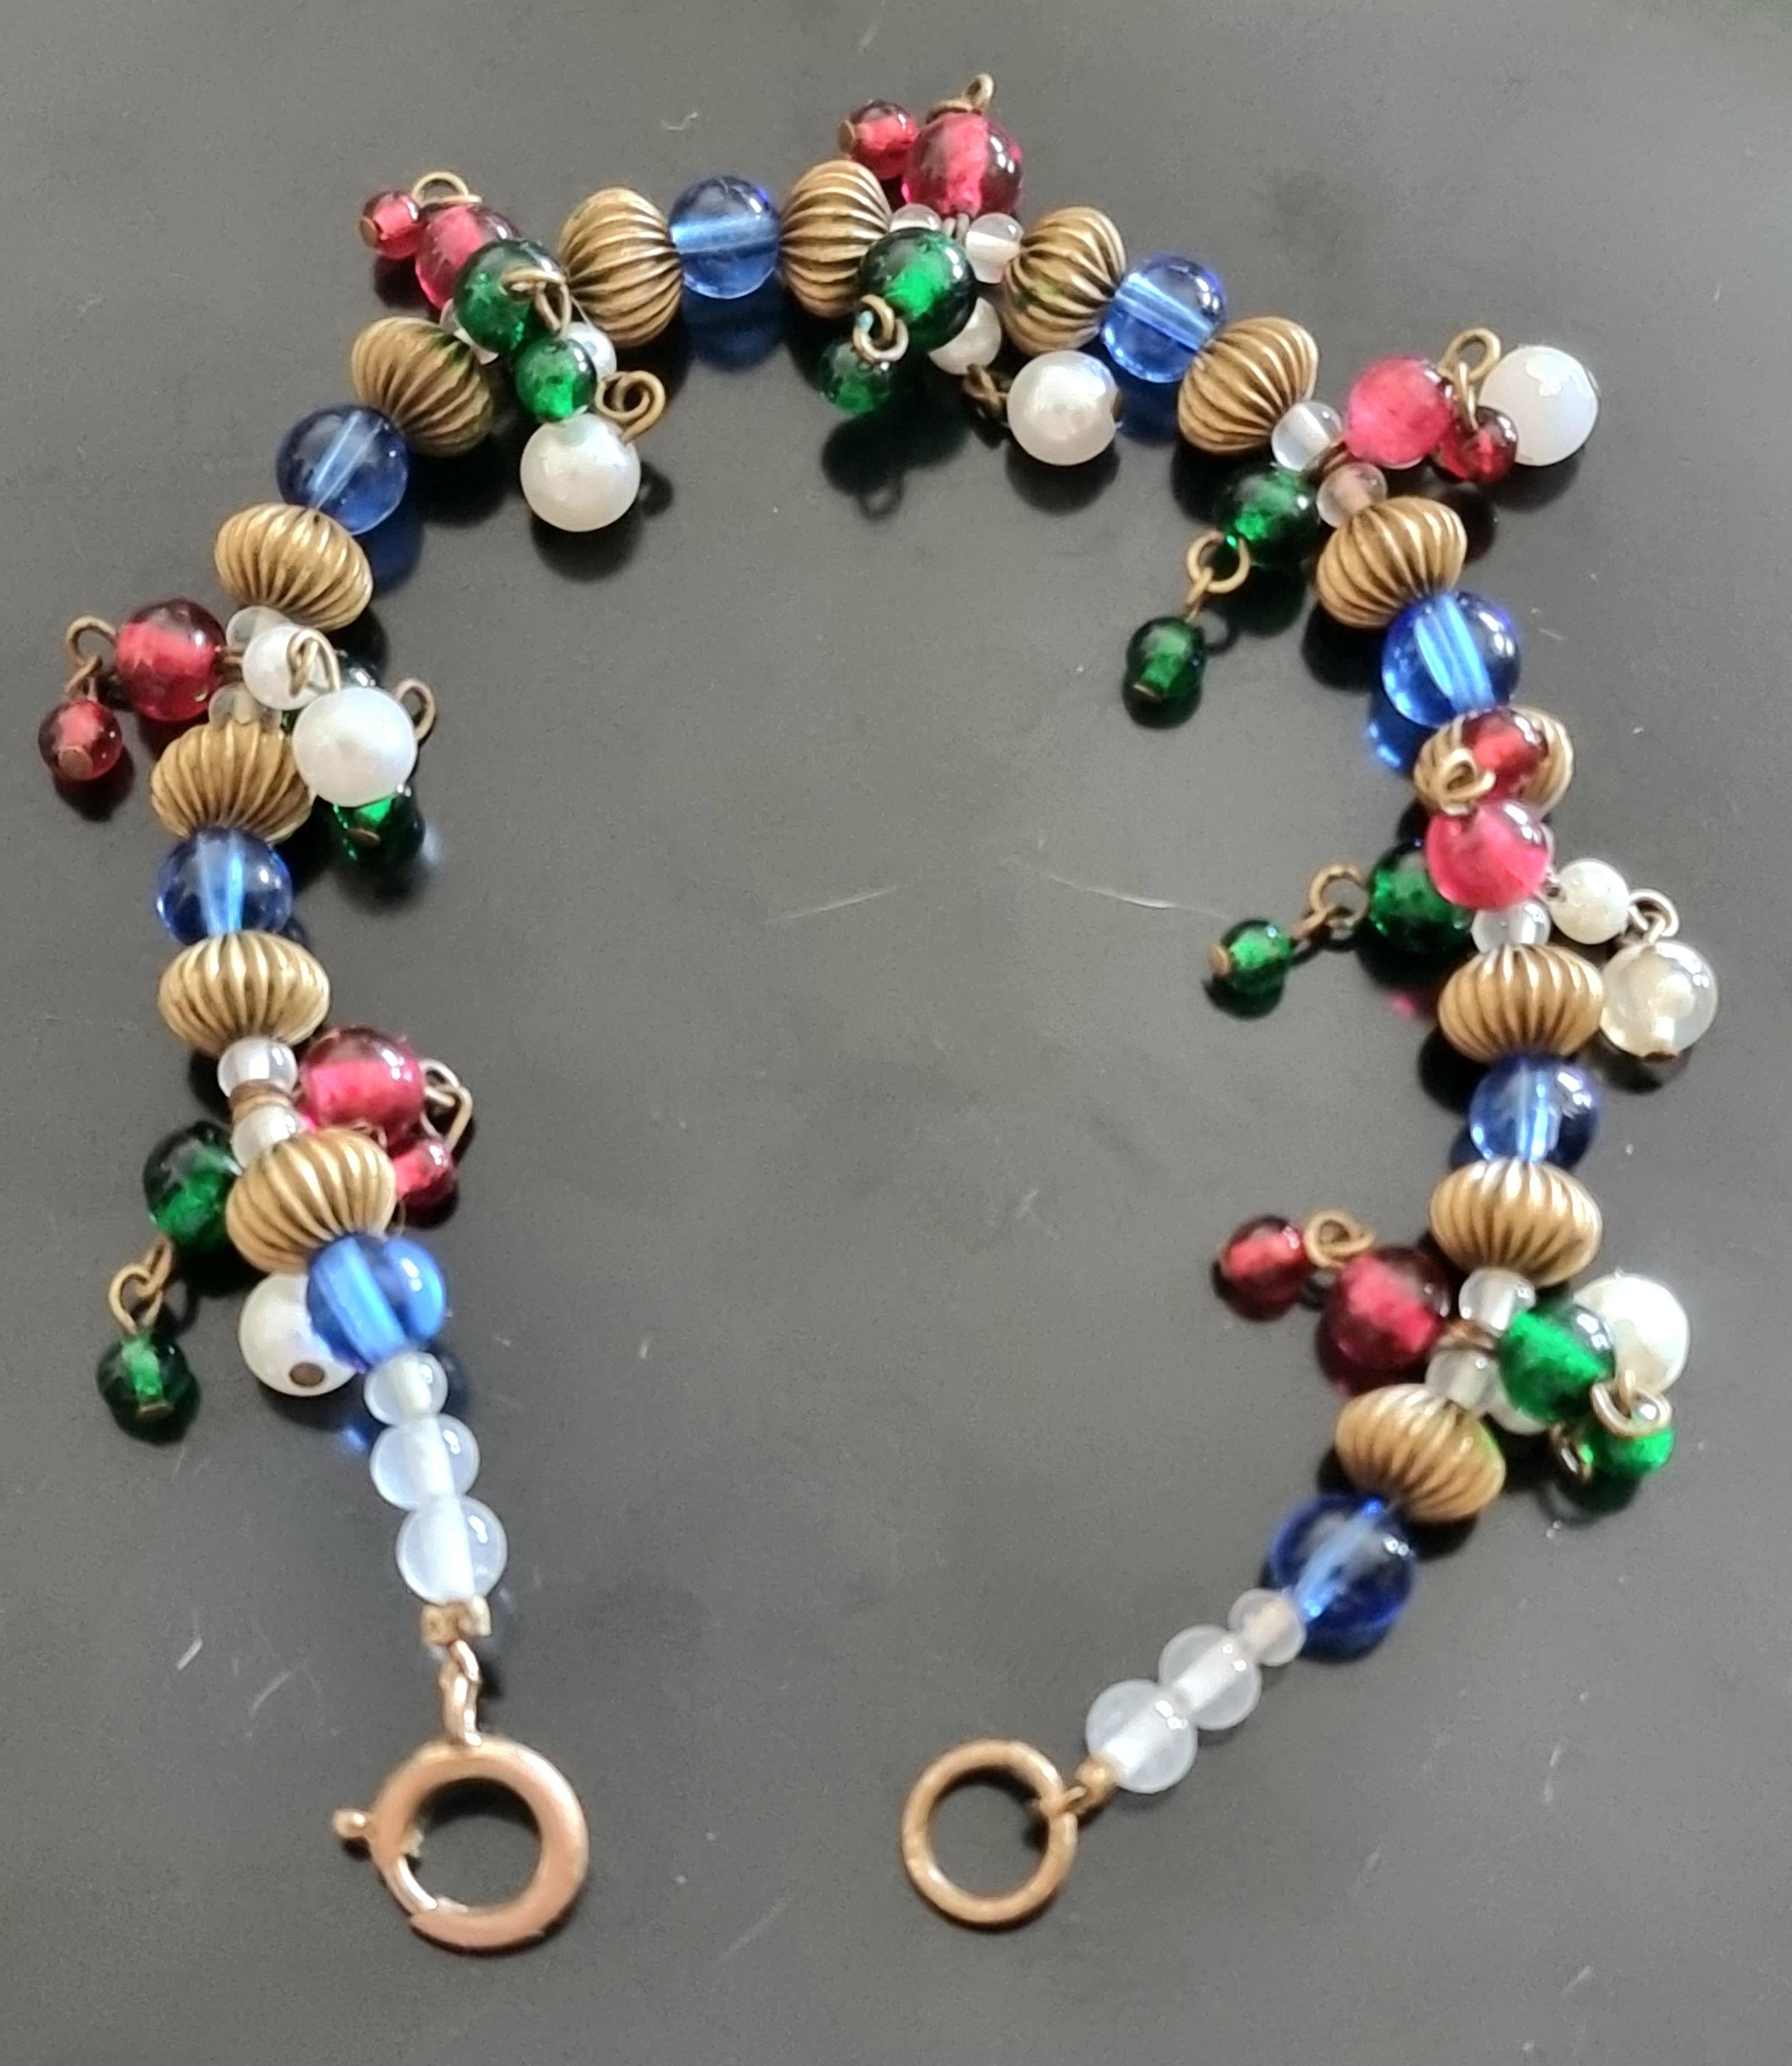 CHANEL GRIPOIX 1950, NECKLACE and BRACELET, gadrooned gilt beads, Gripoix glass For Sale 7